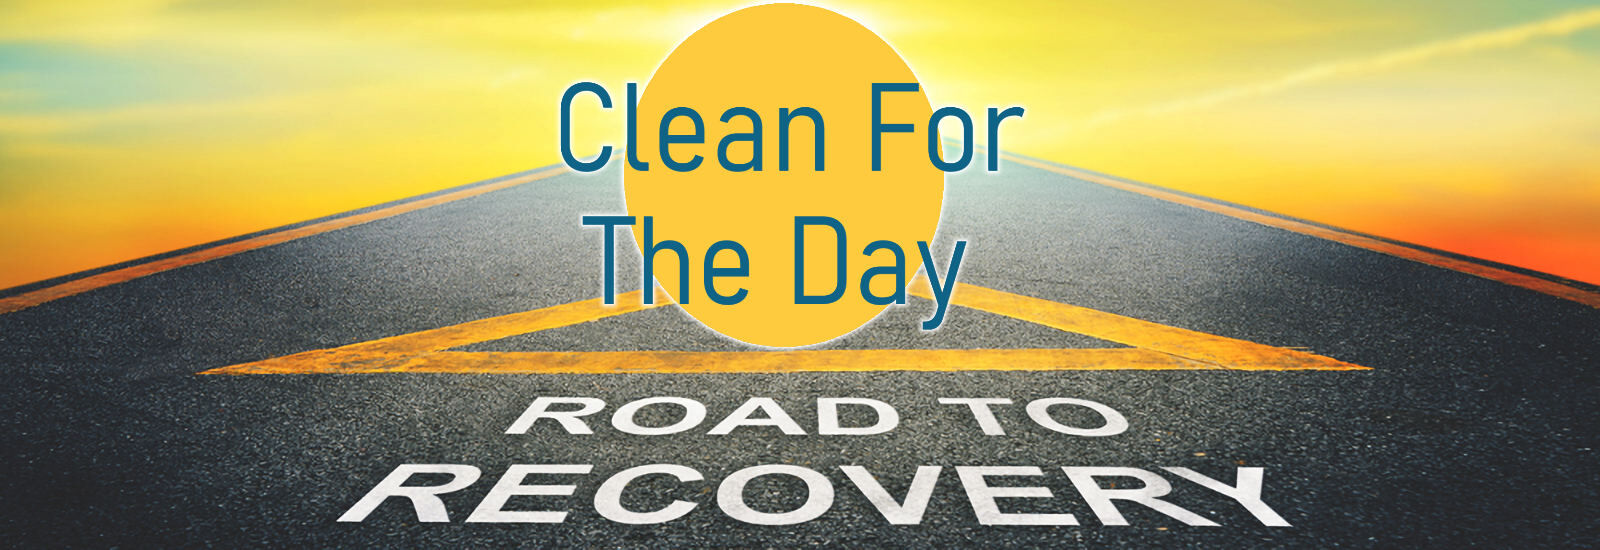 Road To Recovery - Clean For The Day